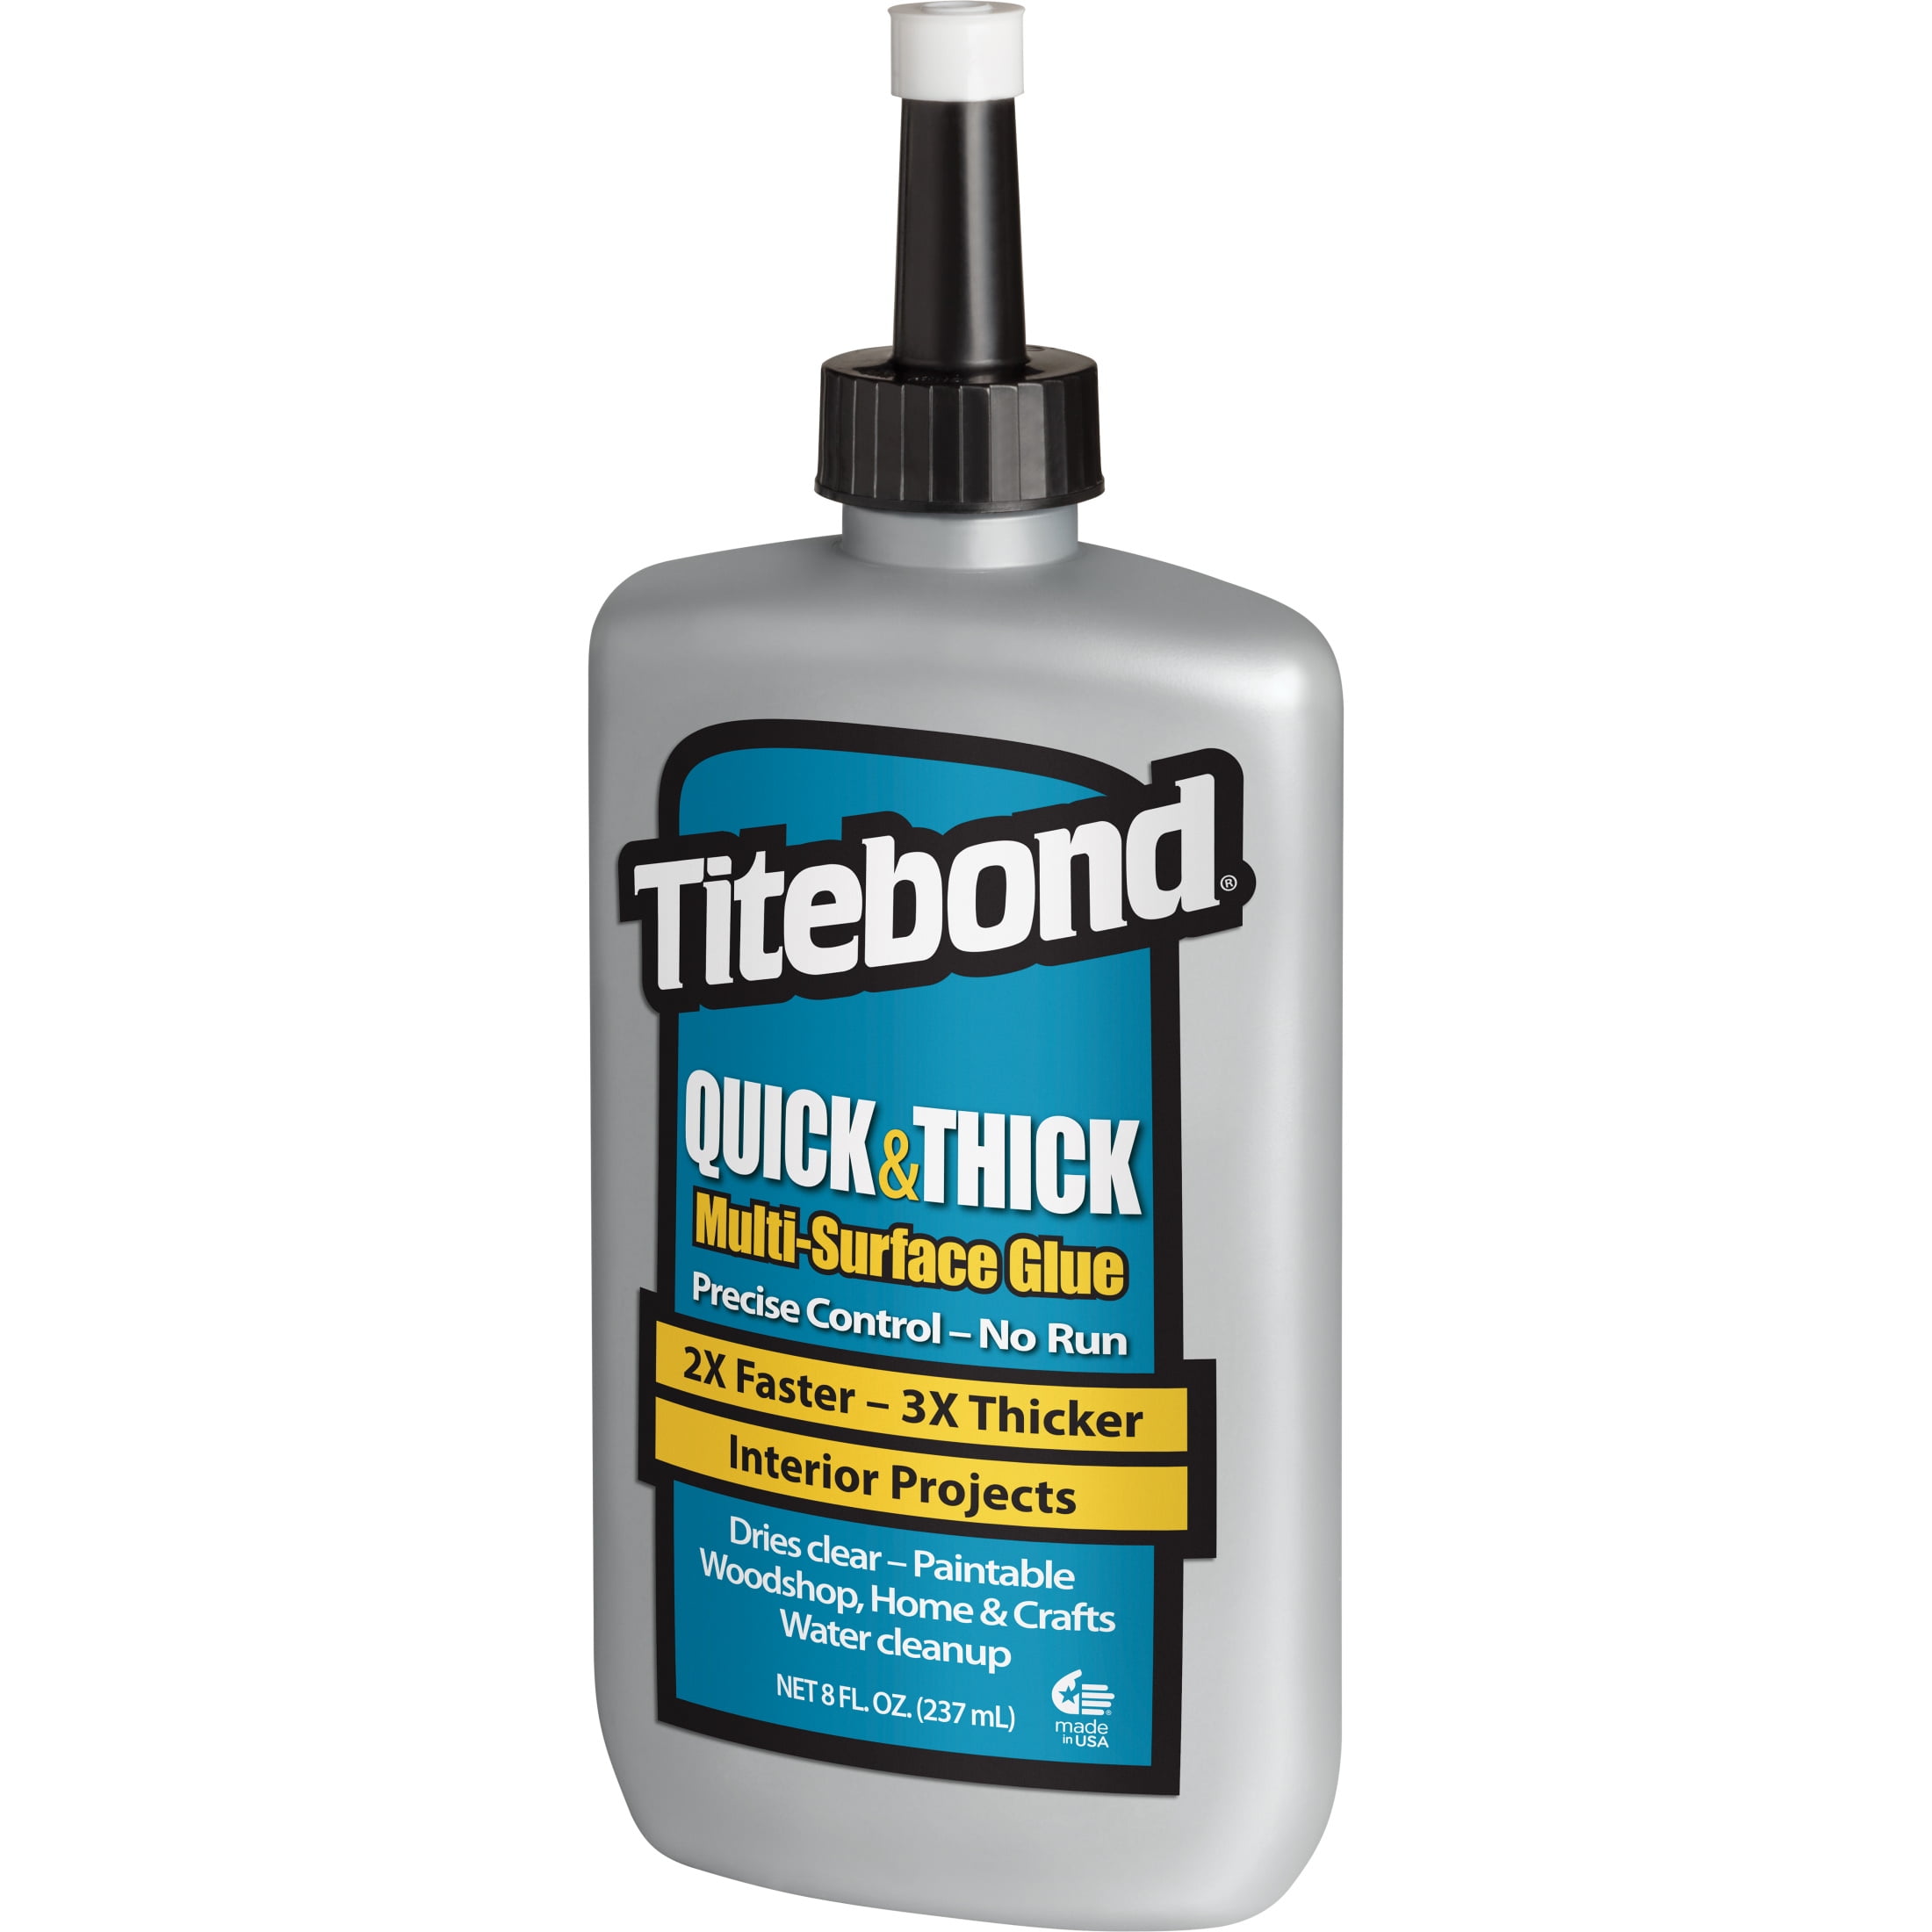 Titebond v. Weldbond - Glue Discussion and What Screws to Use